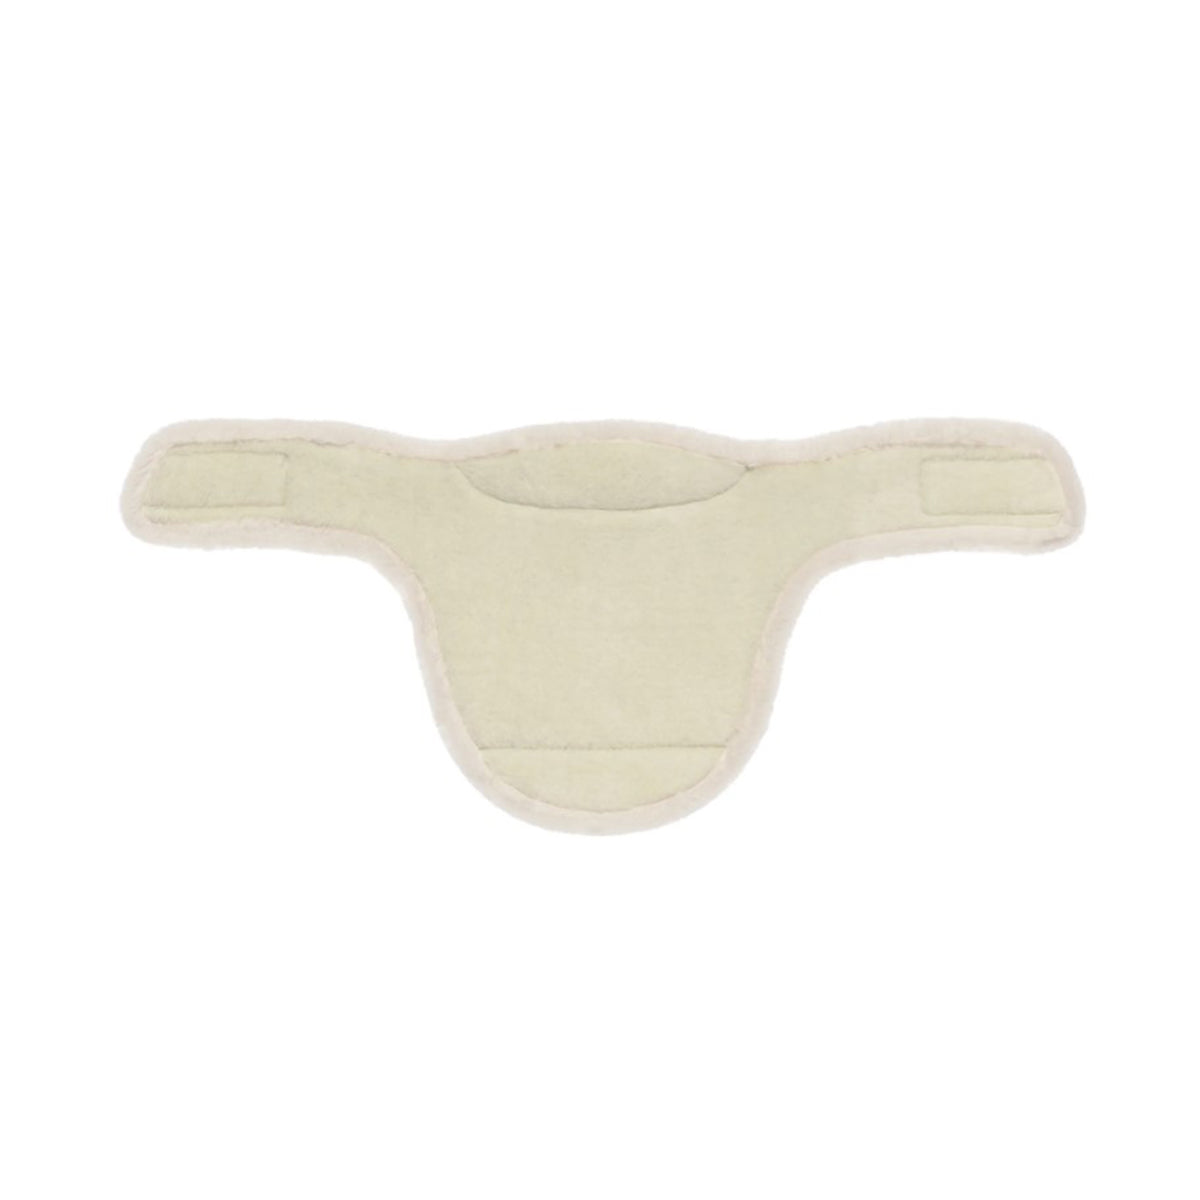 EquiFit Anatomical BellyGuard Girth Replacement Liners